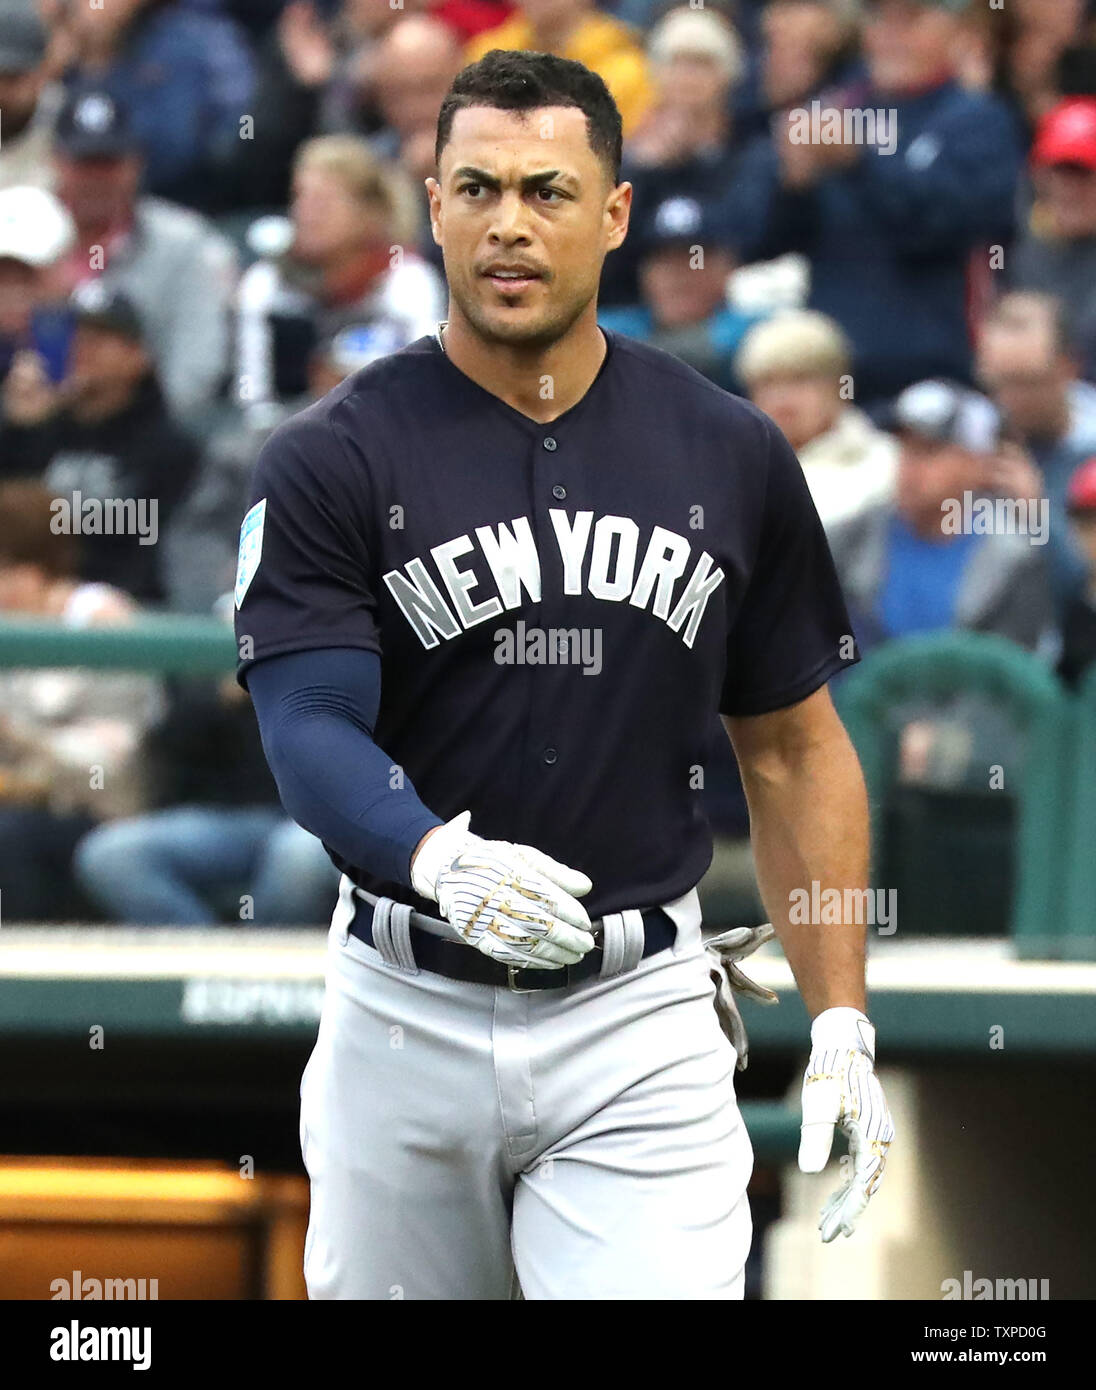 New York Yankees Giancarlo Stanton heads to the dugout after batting  against the Atlanta Braves during a spring training game at Champion Stadium  in Kissimmee, Florida on March 18, 2019. Photo by